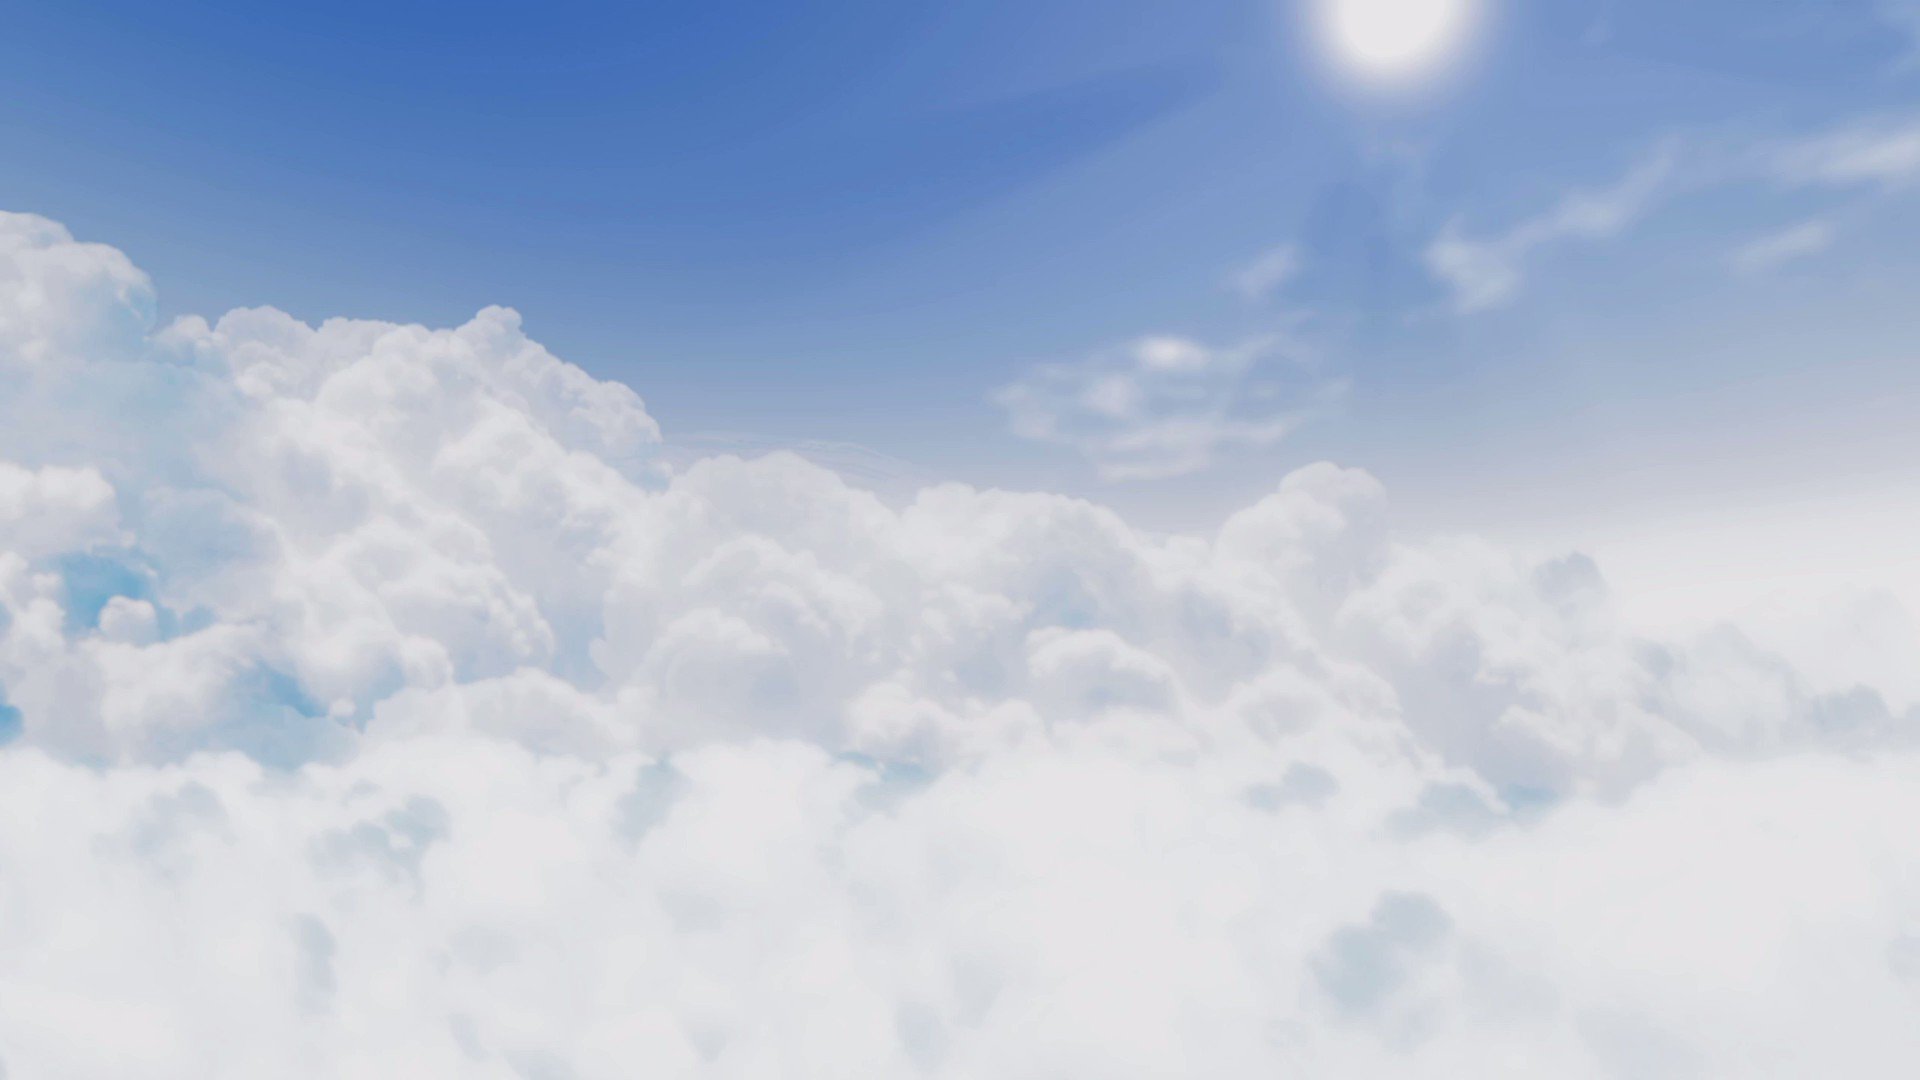 Funeral Clouds Wallpapers